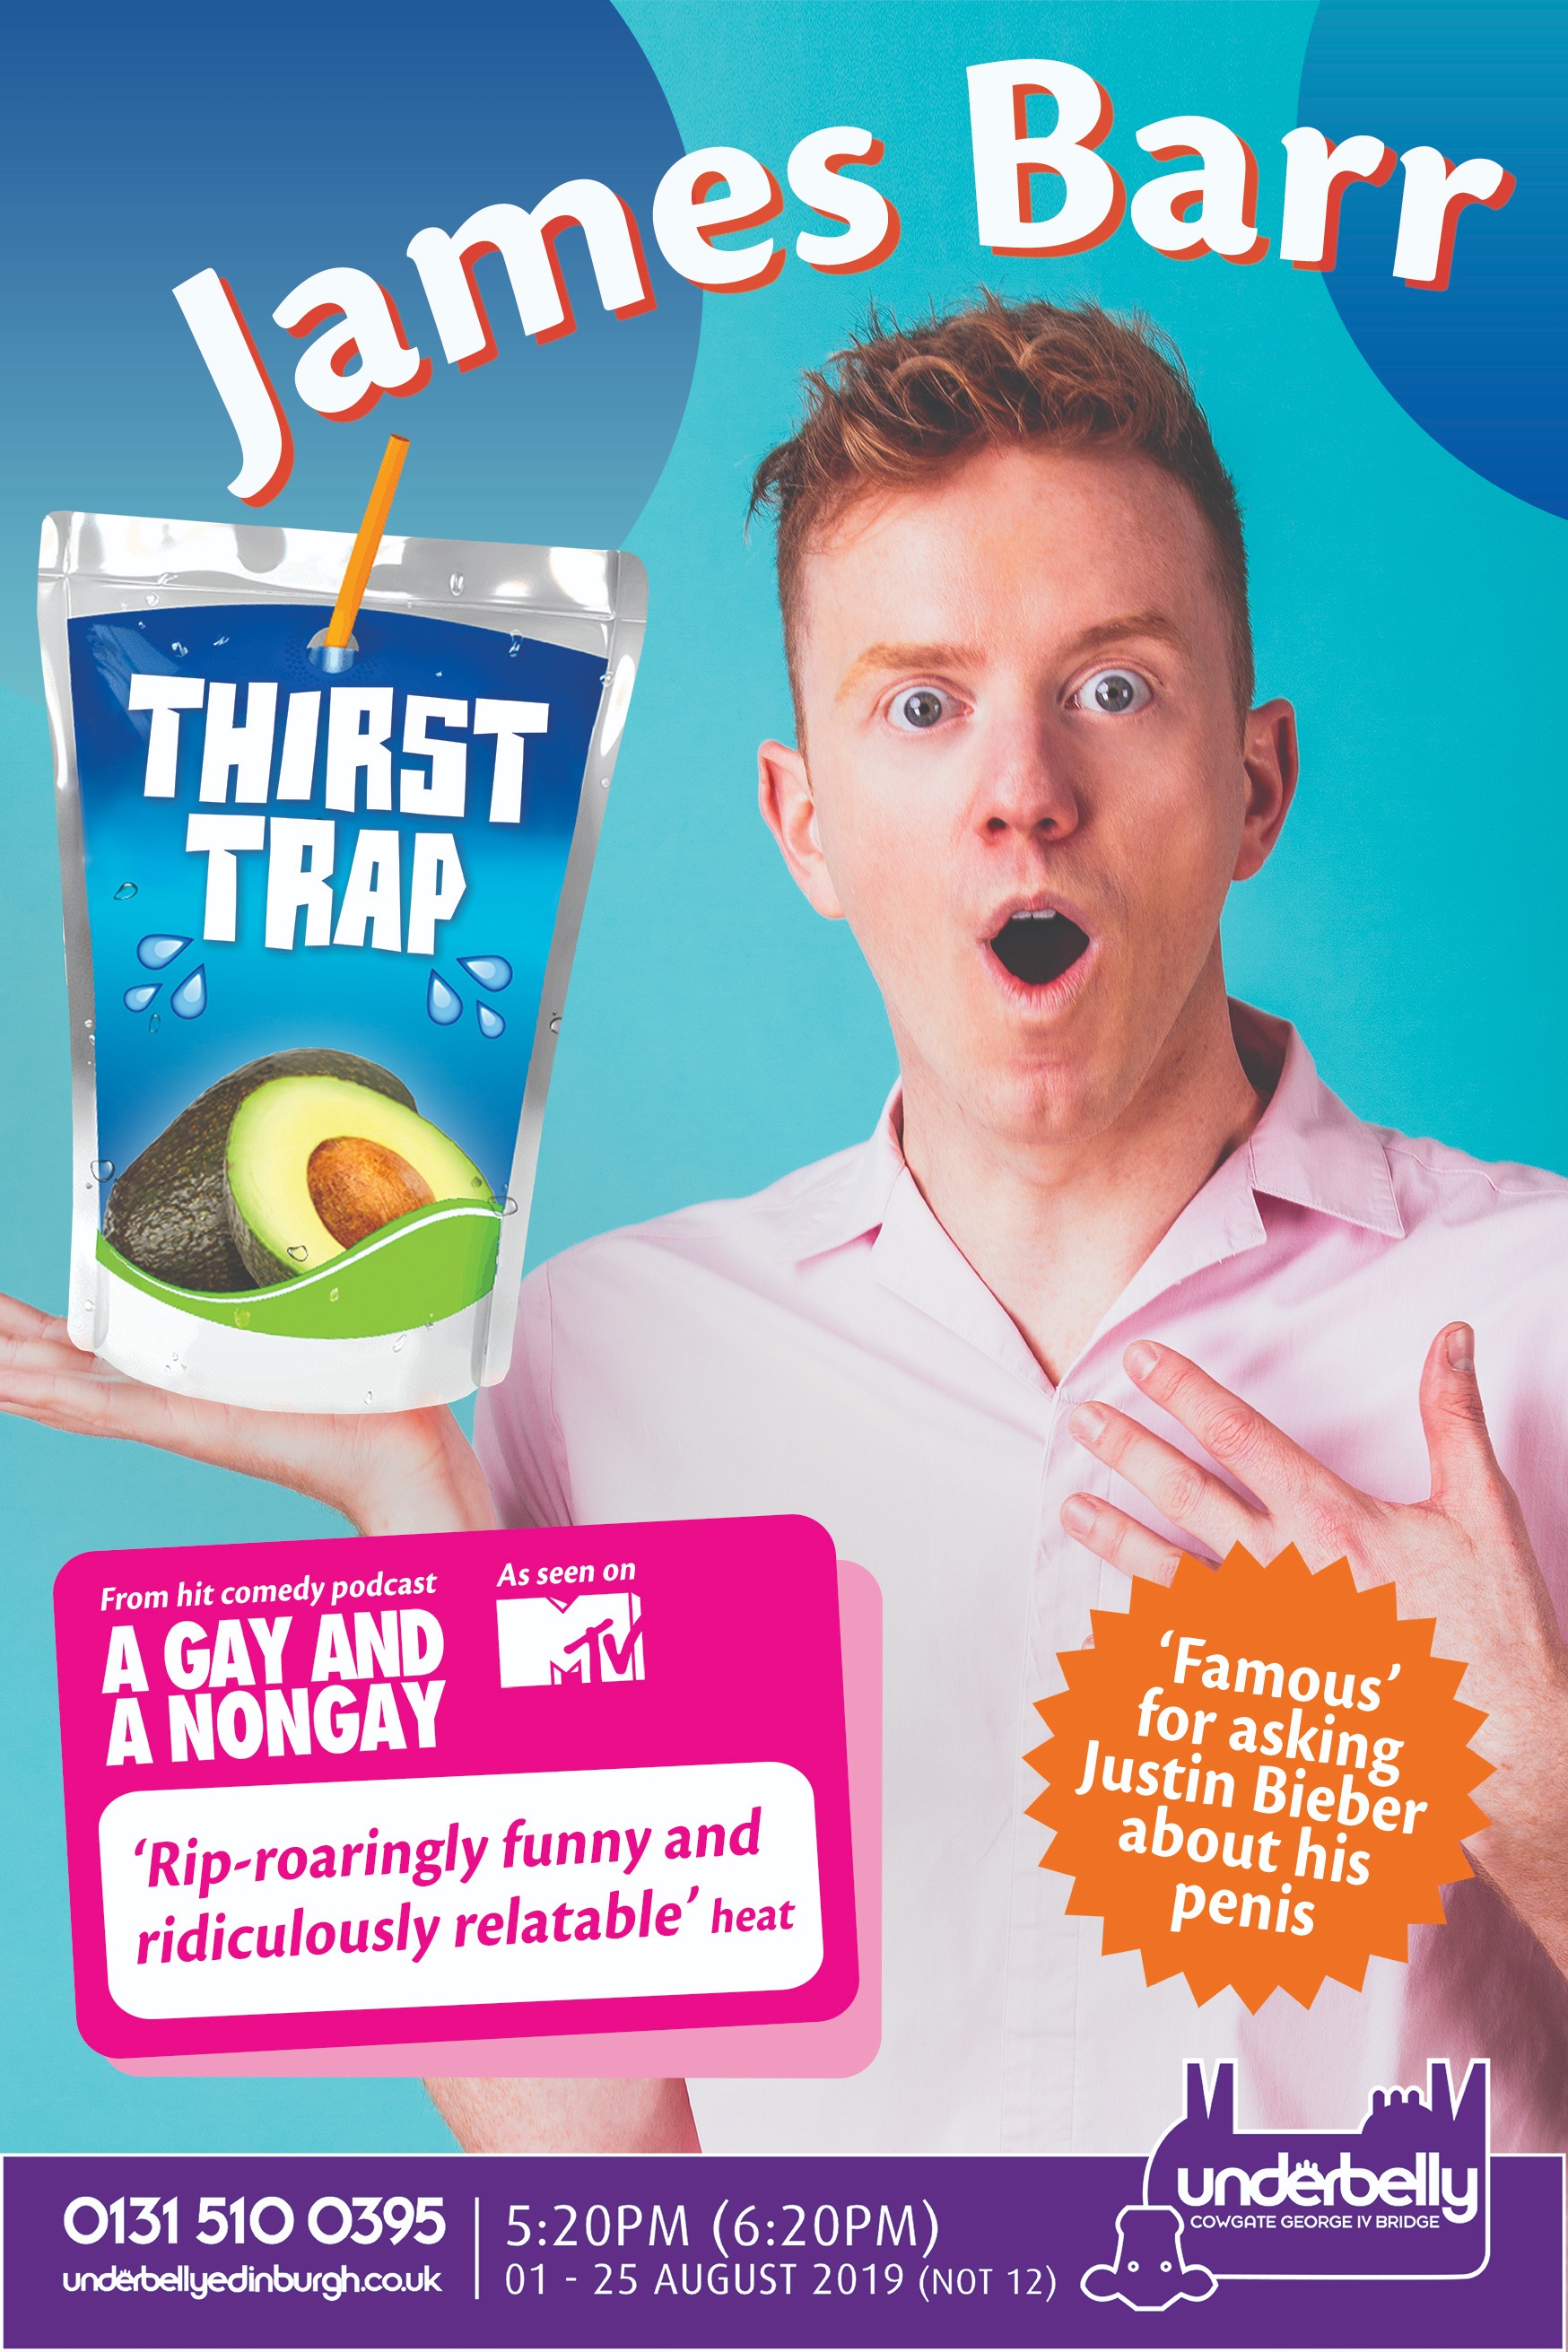 The poster for James Barr: Thirst Trap